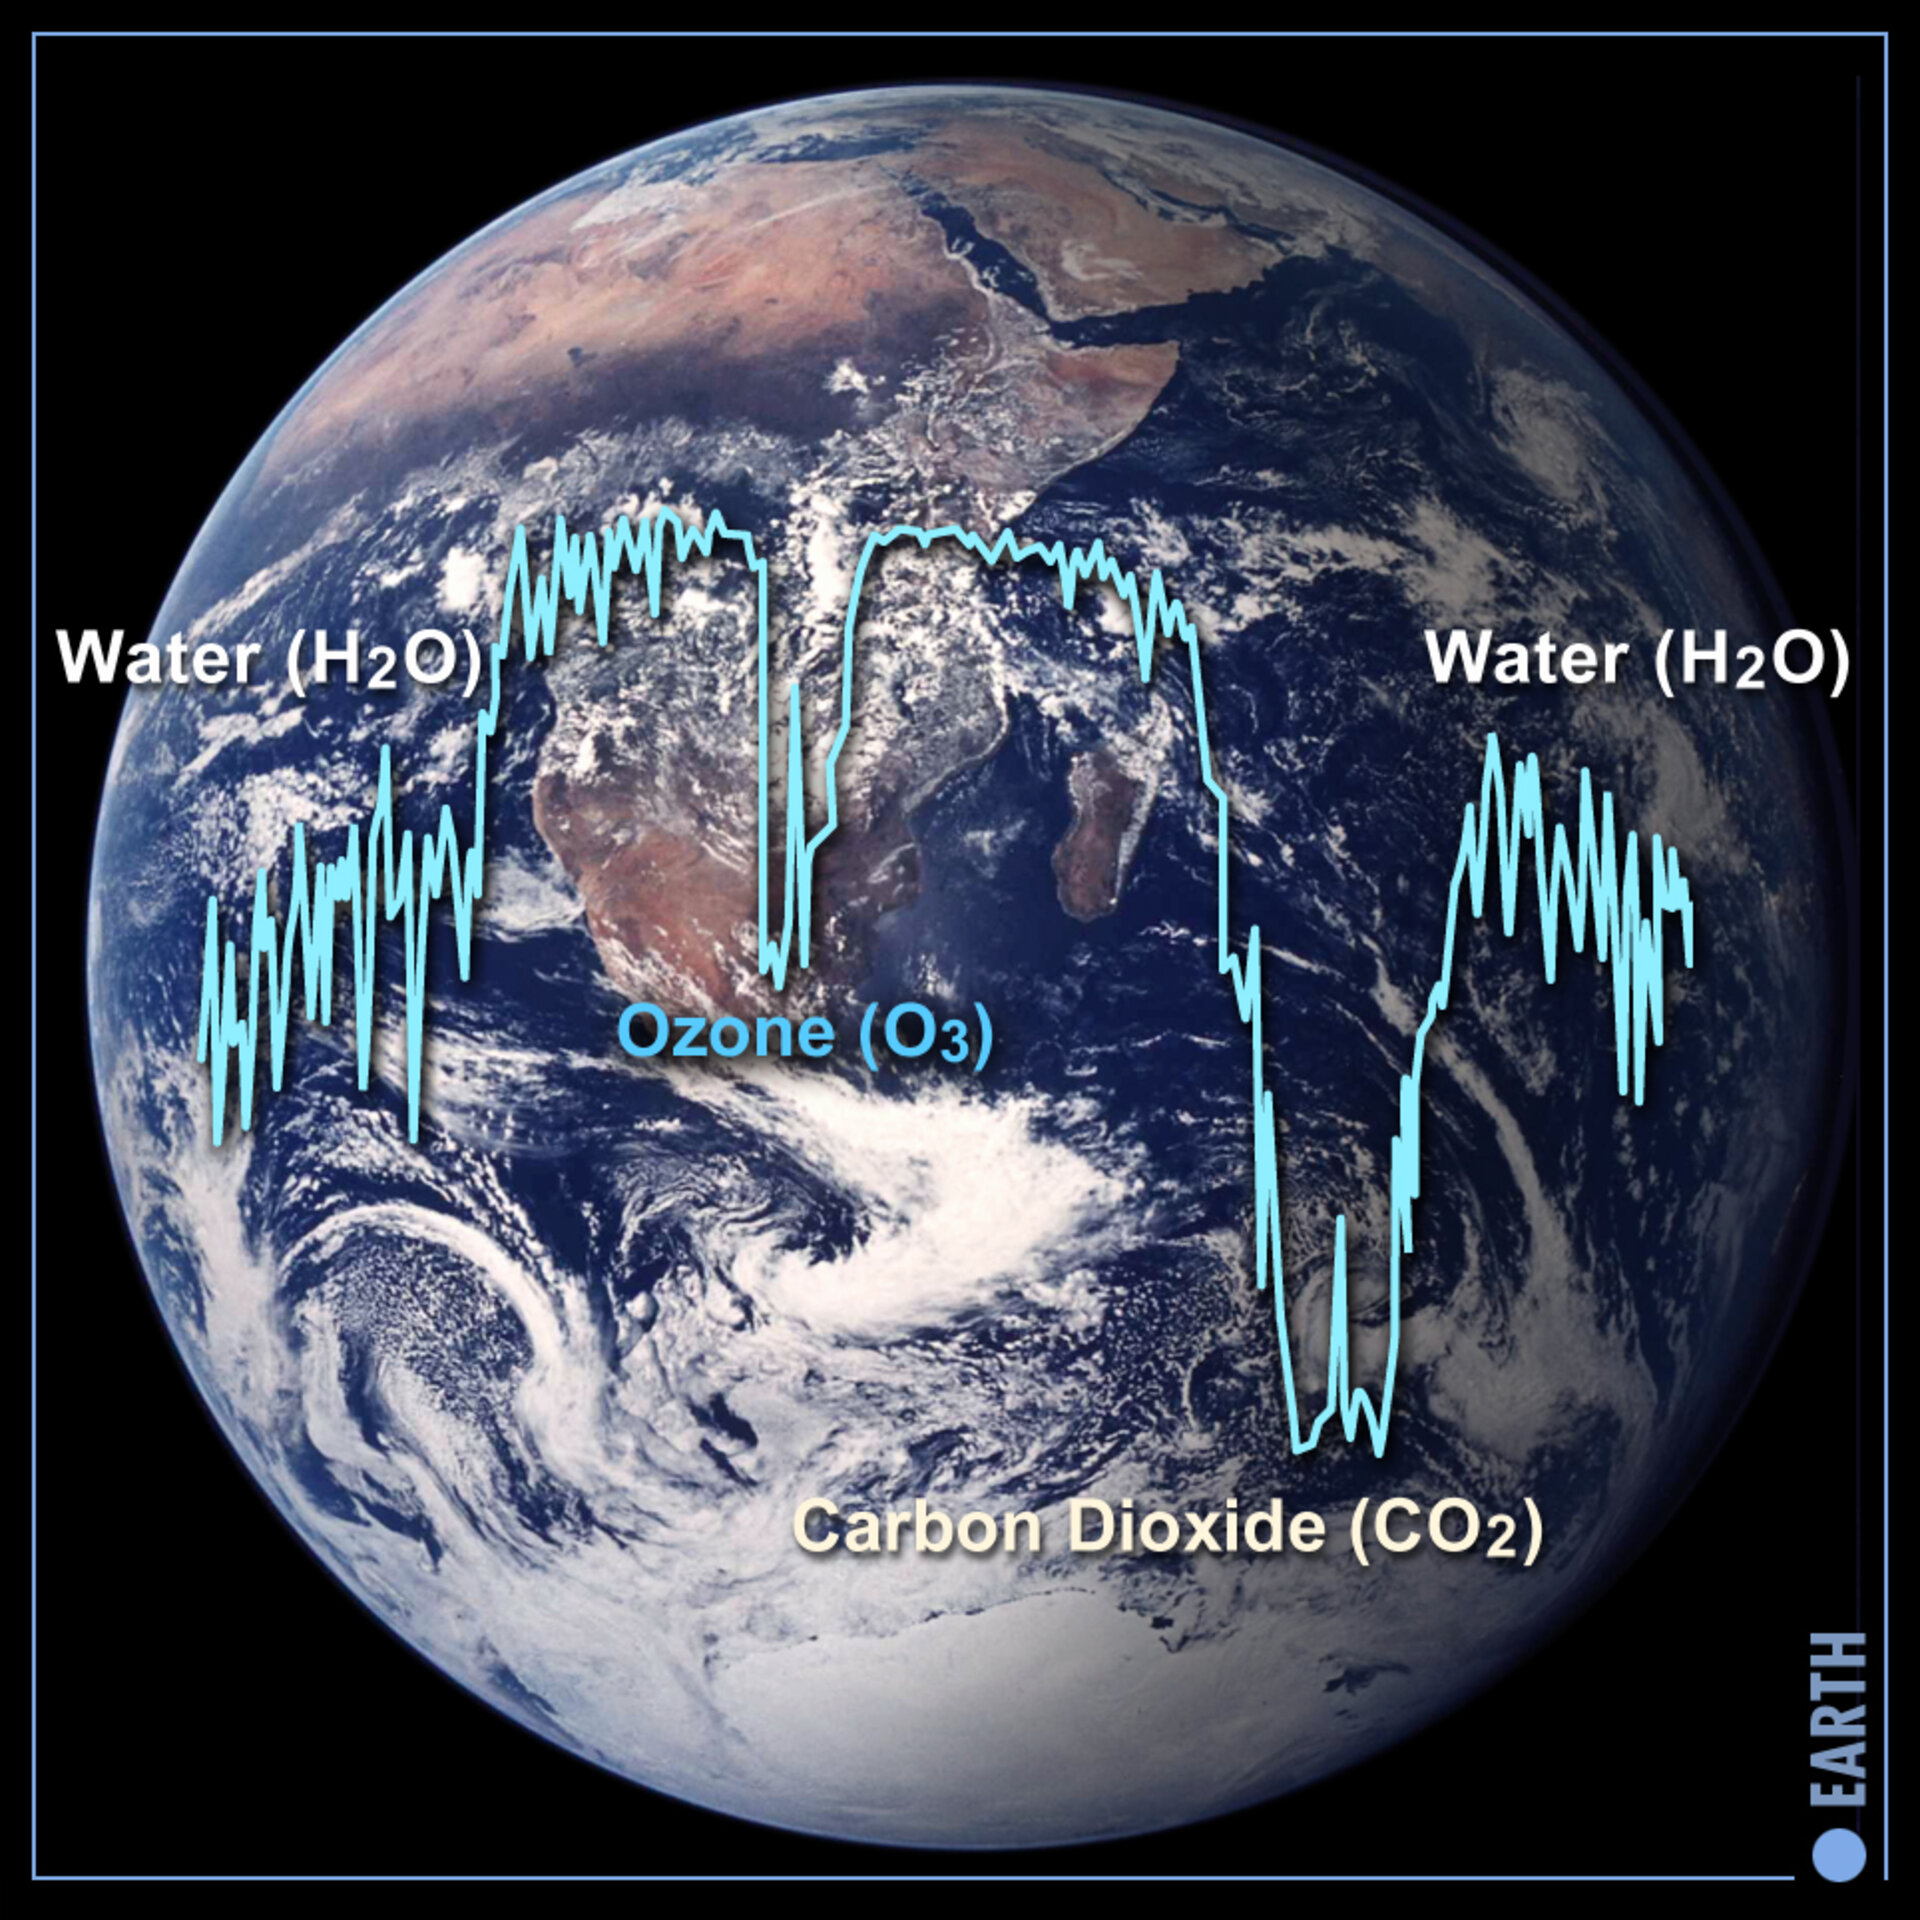 Ozone in a planet's spectrum may indicate the presence of life